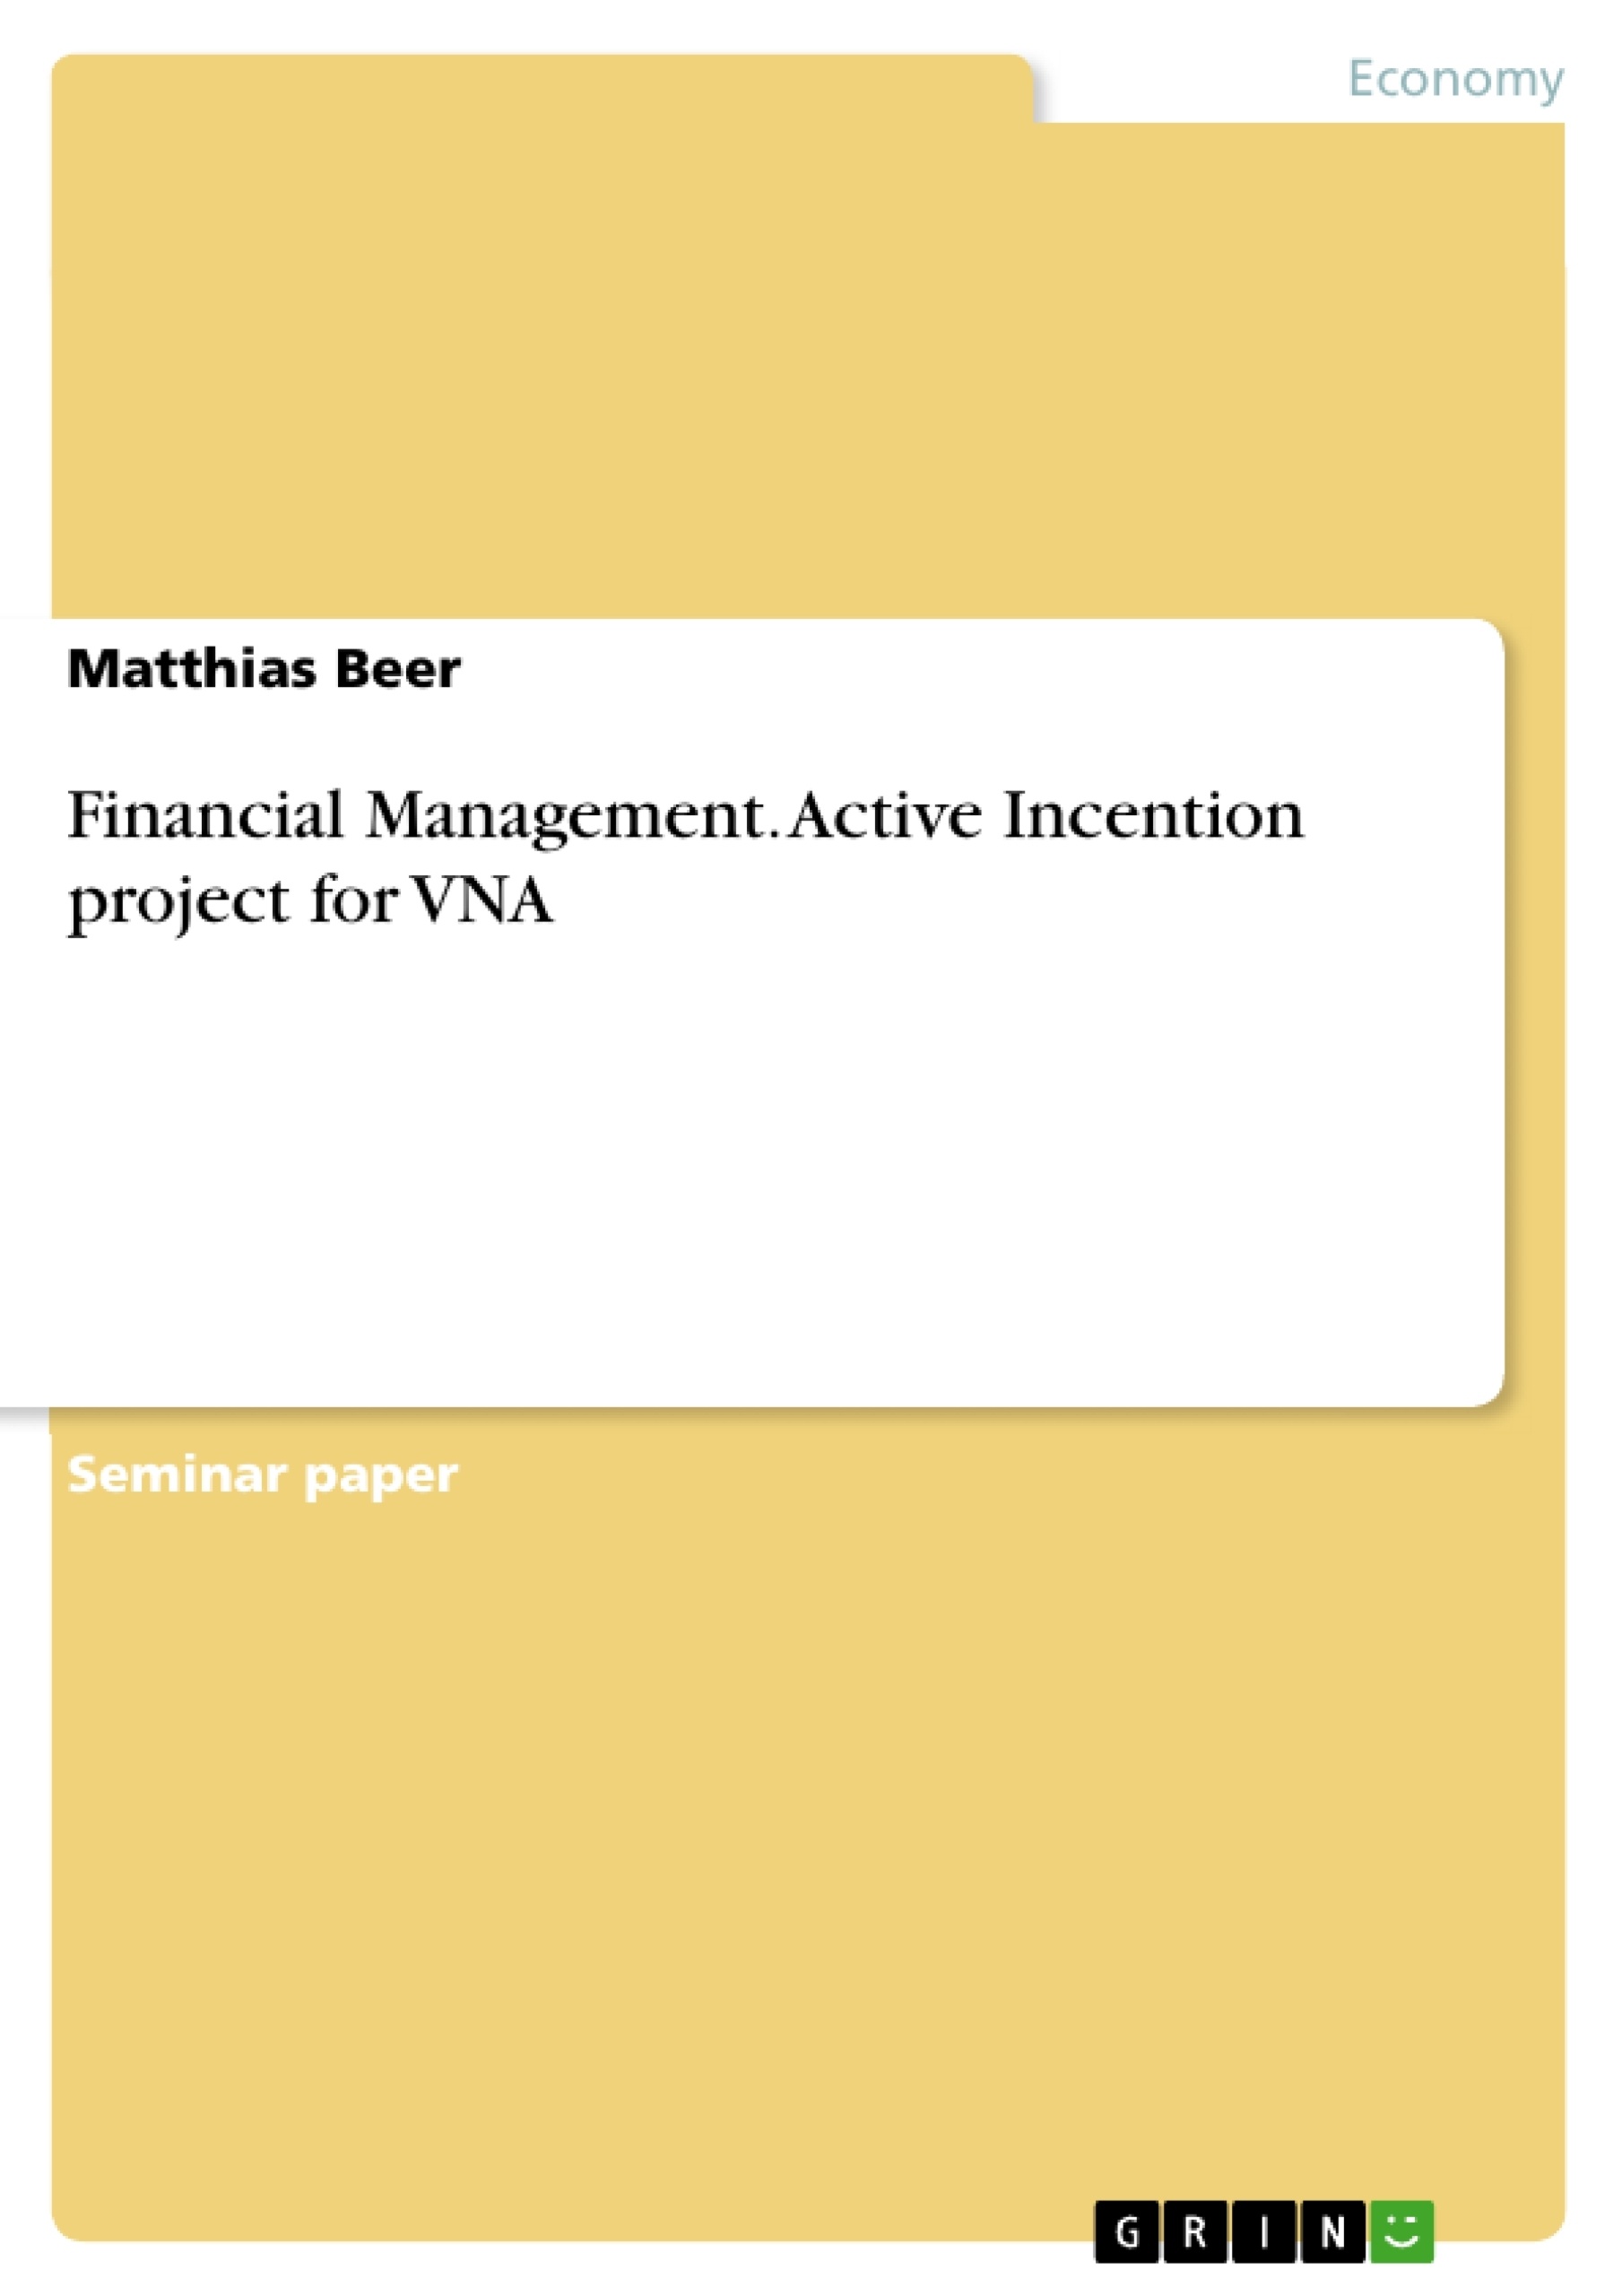 Title: Financial Management. Active Incention project for VNA